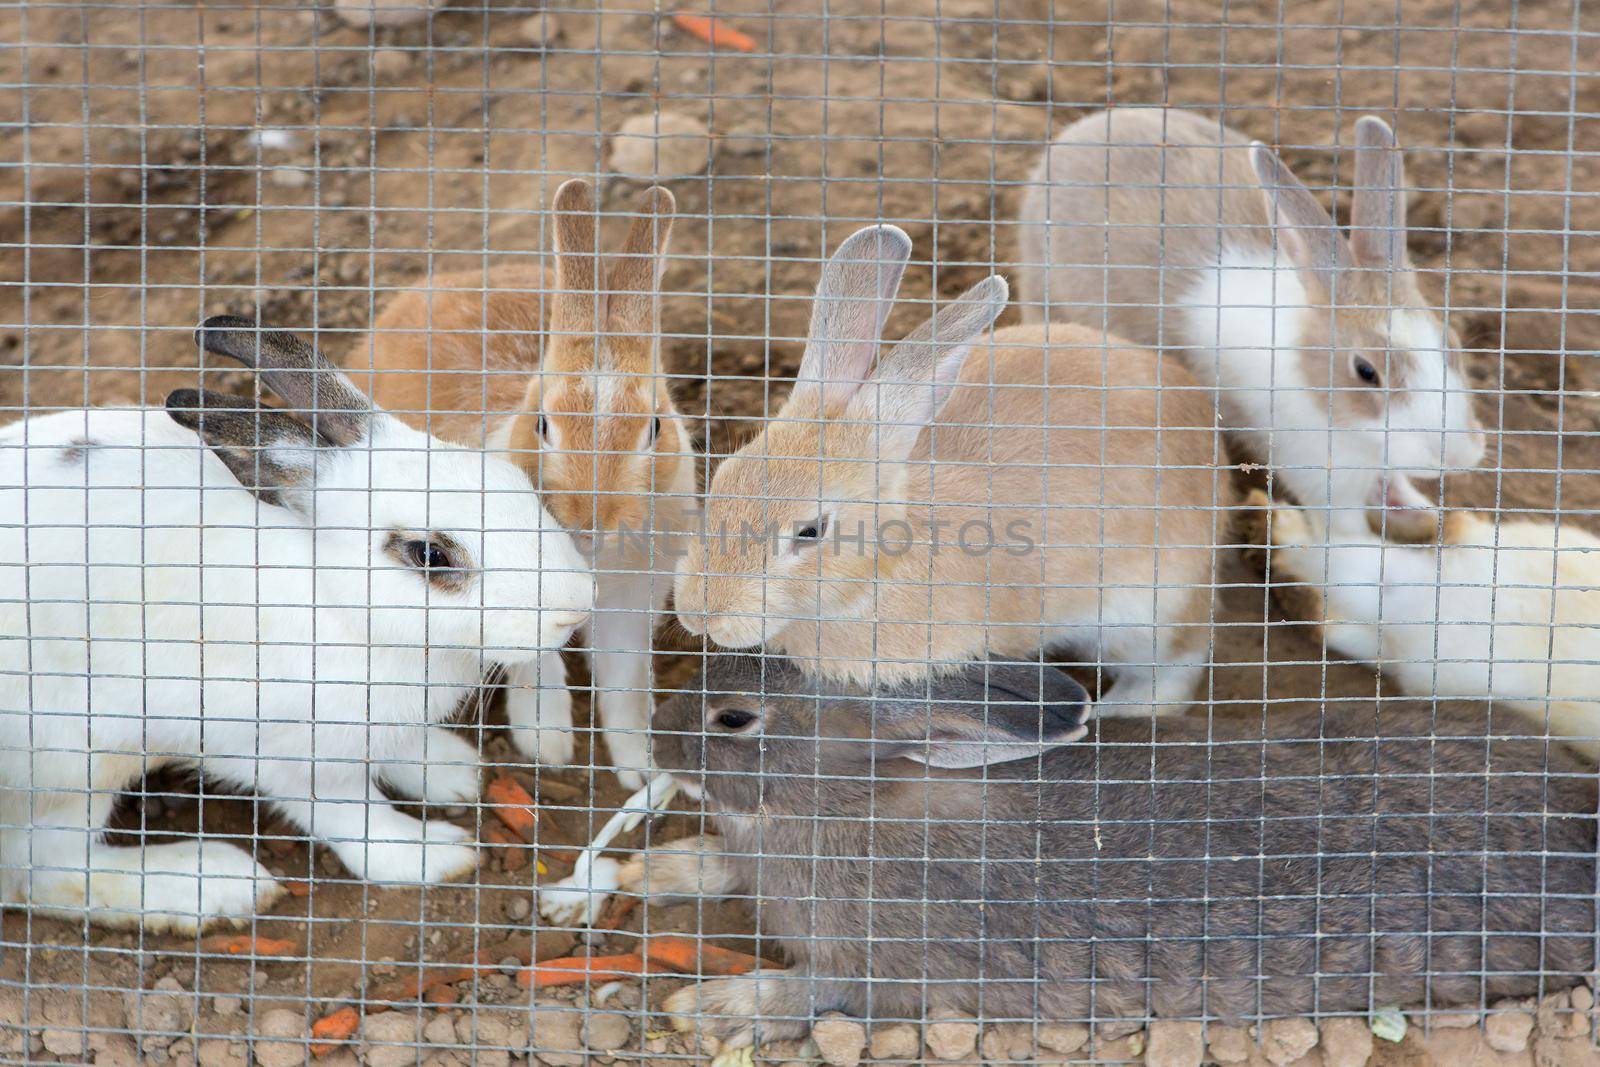 Rabbits in the cage